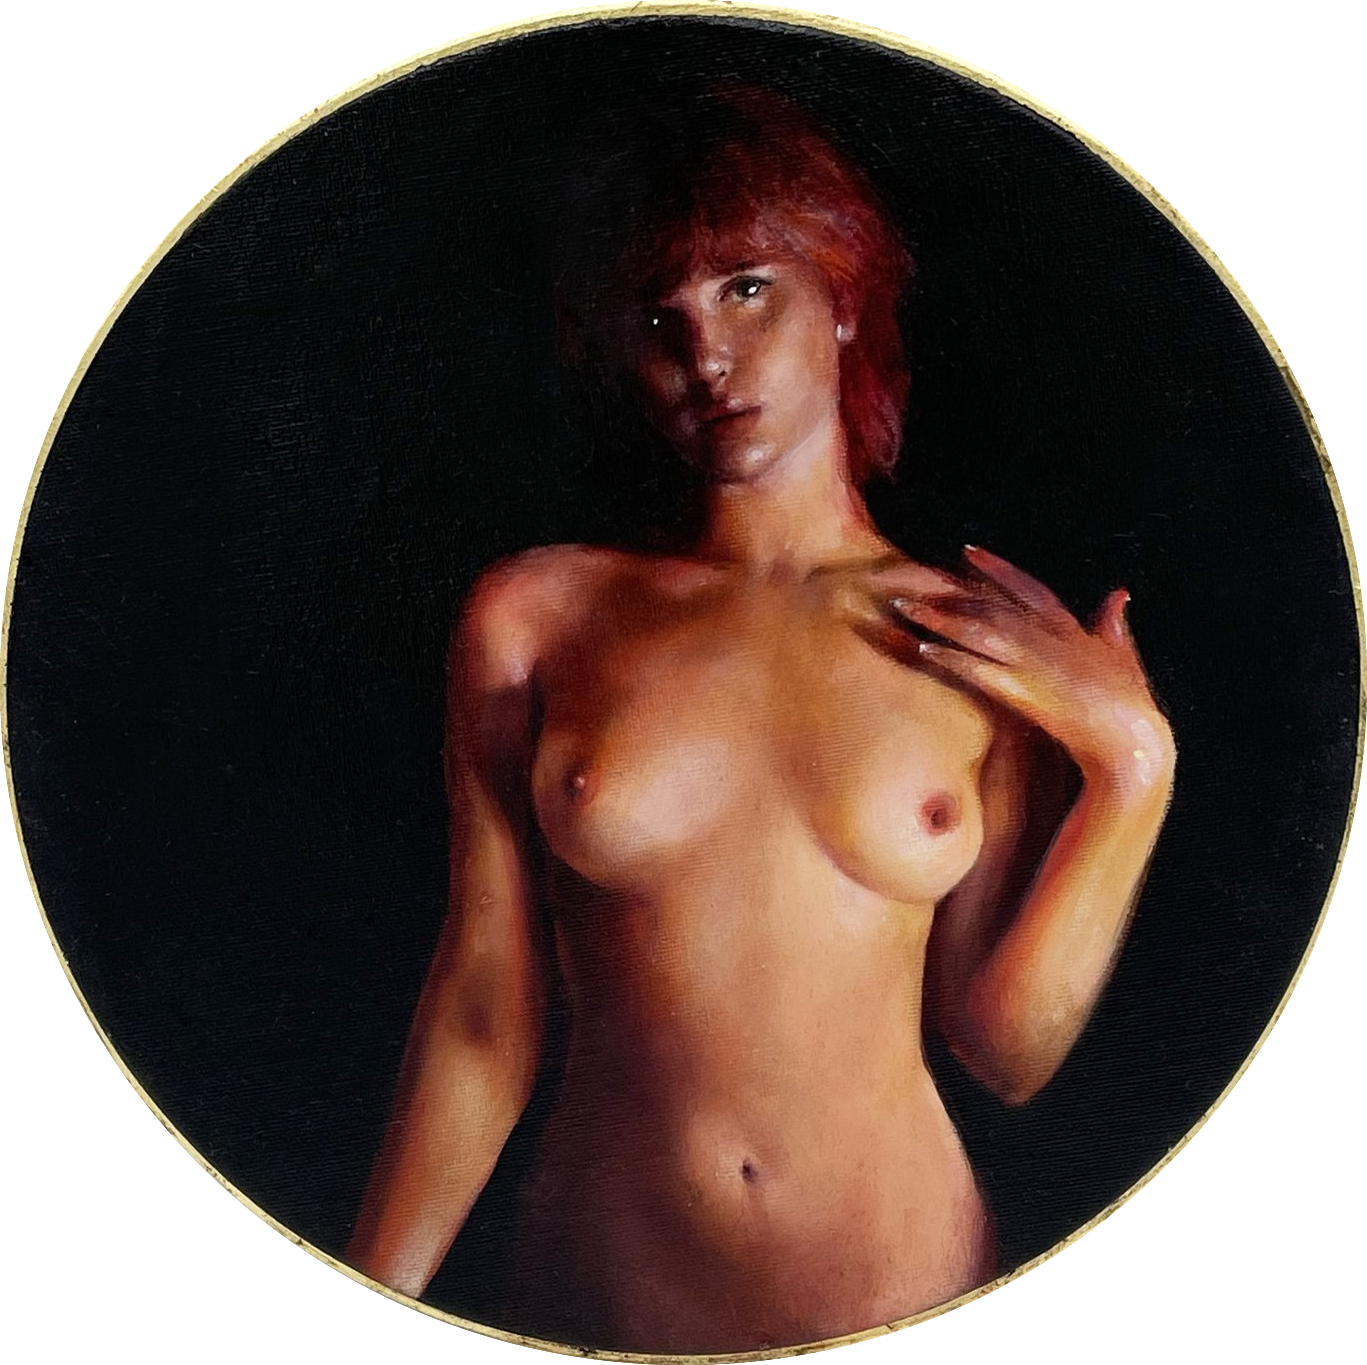 Fire Nymph - 12 Diameter, oil on canvas, $1200